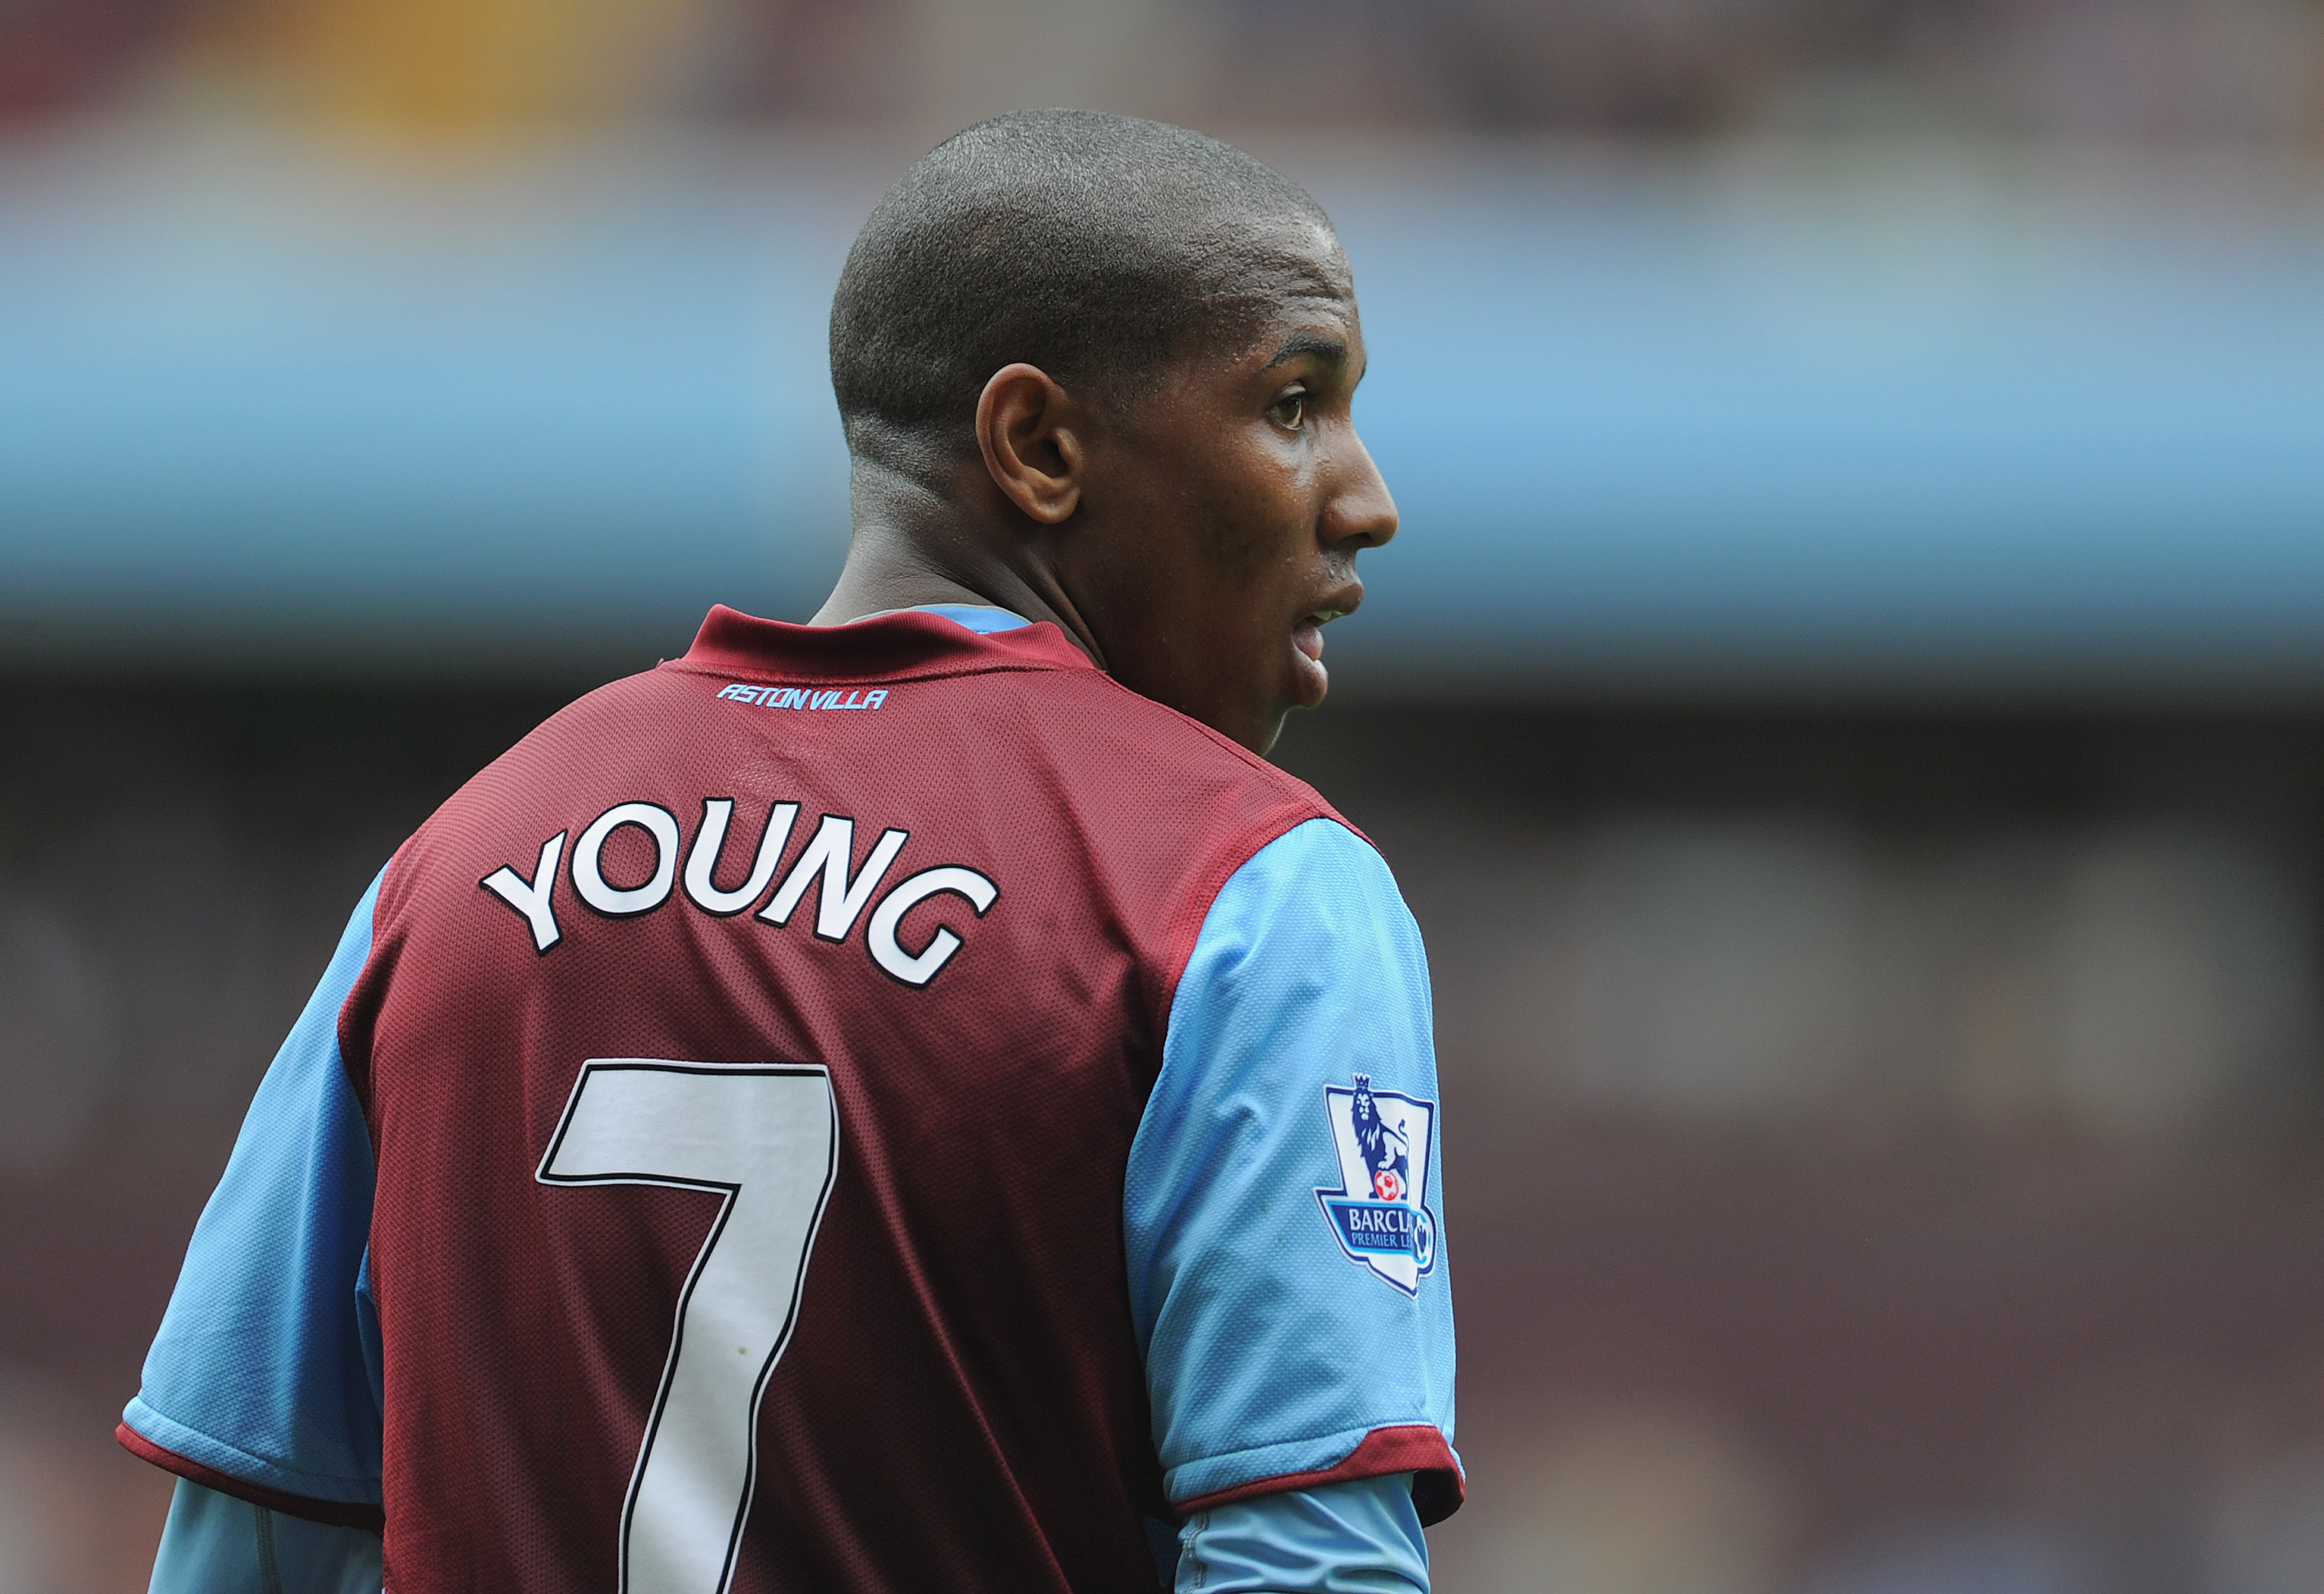 BIRMINGHAM, ENGLAND - MAY 07:  Ashley Young of Villa looks on during the Barclays Premier League match between Aston Villa and Wigan Athletic on May 7, 2011 in Birmingham, England.  (Photo by Michael Regan/Getty Images)